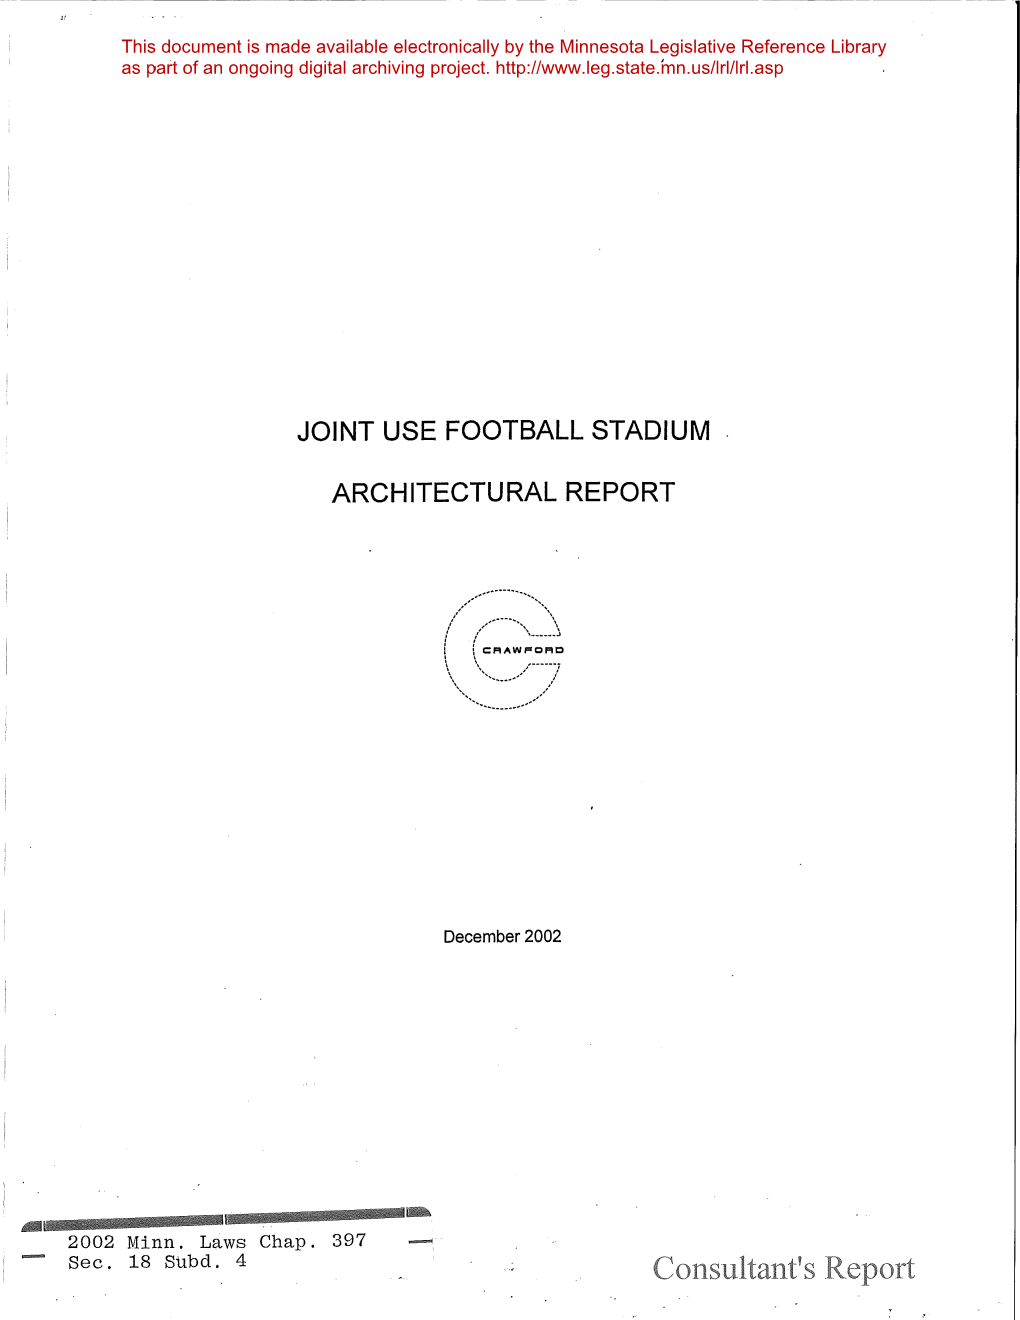 Joint Use Football Stadium Architectural Report